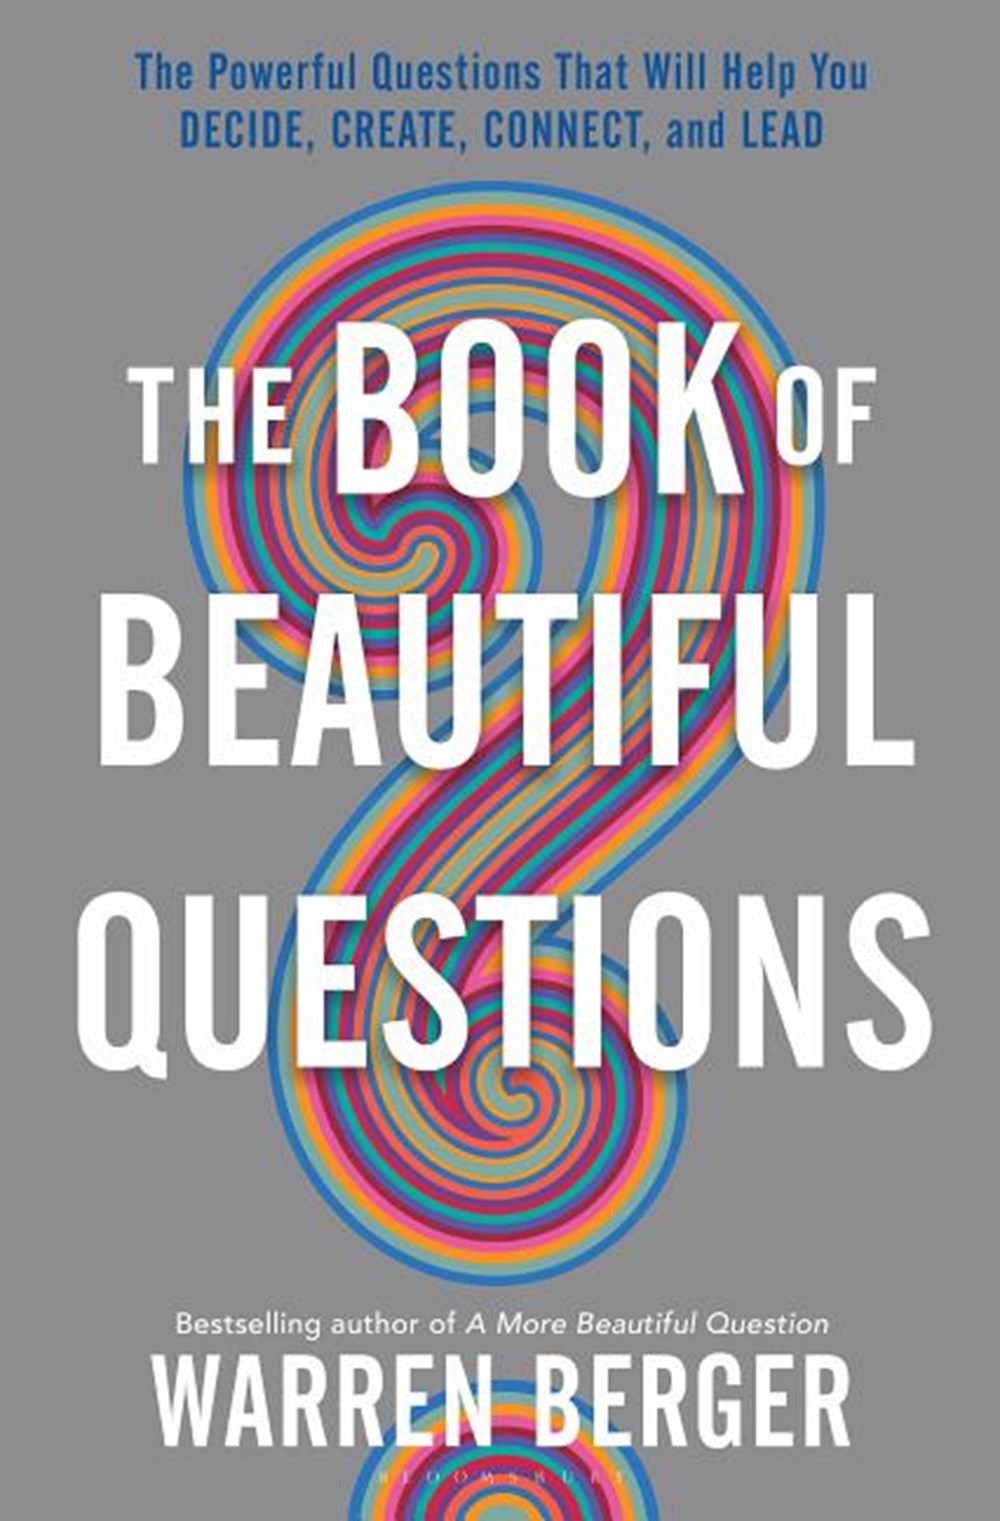 Book of Beautiful Questions The Powerful Questions That Will Help You Decide, Create, Connect, and L